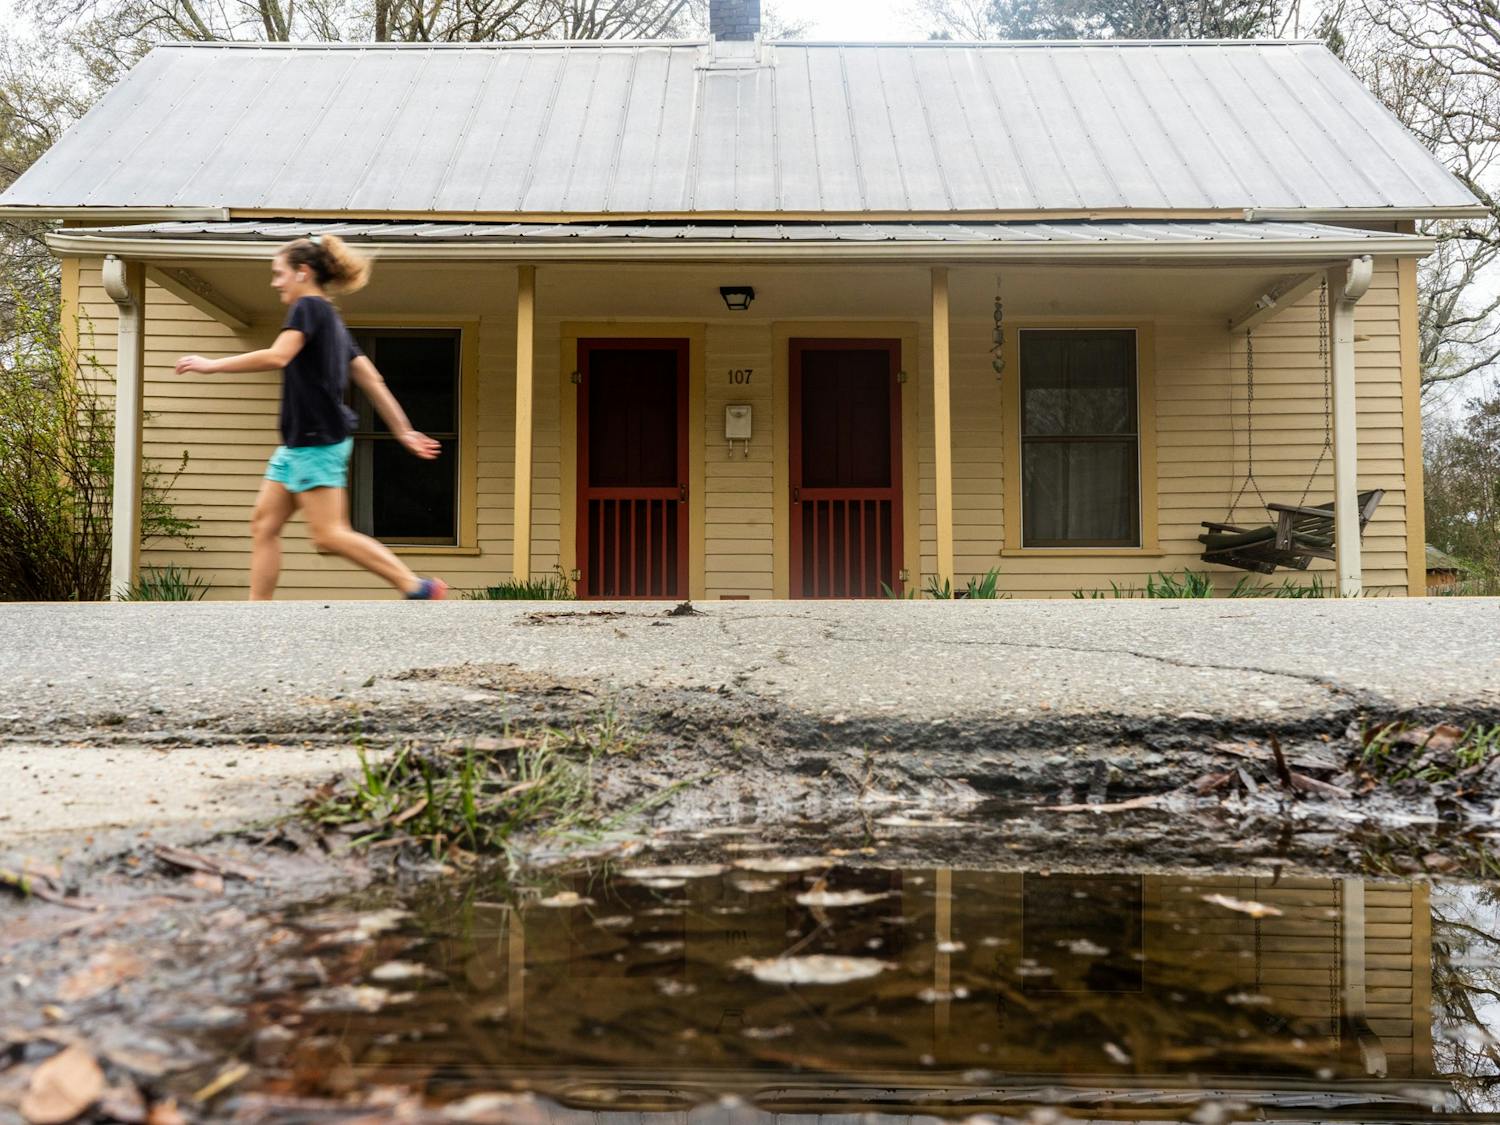 A pedestrian walks in front of a house in Carrboro on Thursday, Mar. 24, 2022. The Carrboro Town Council is debating ways to increase affordable housing in the community.